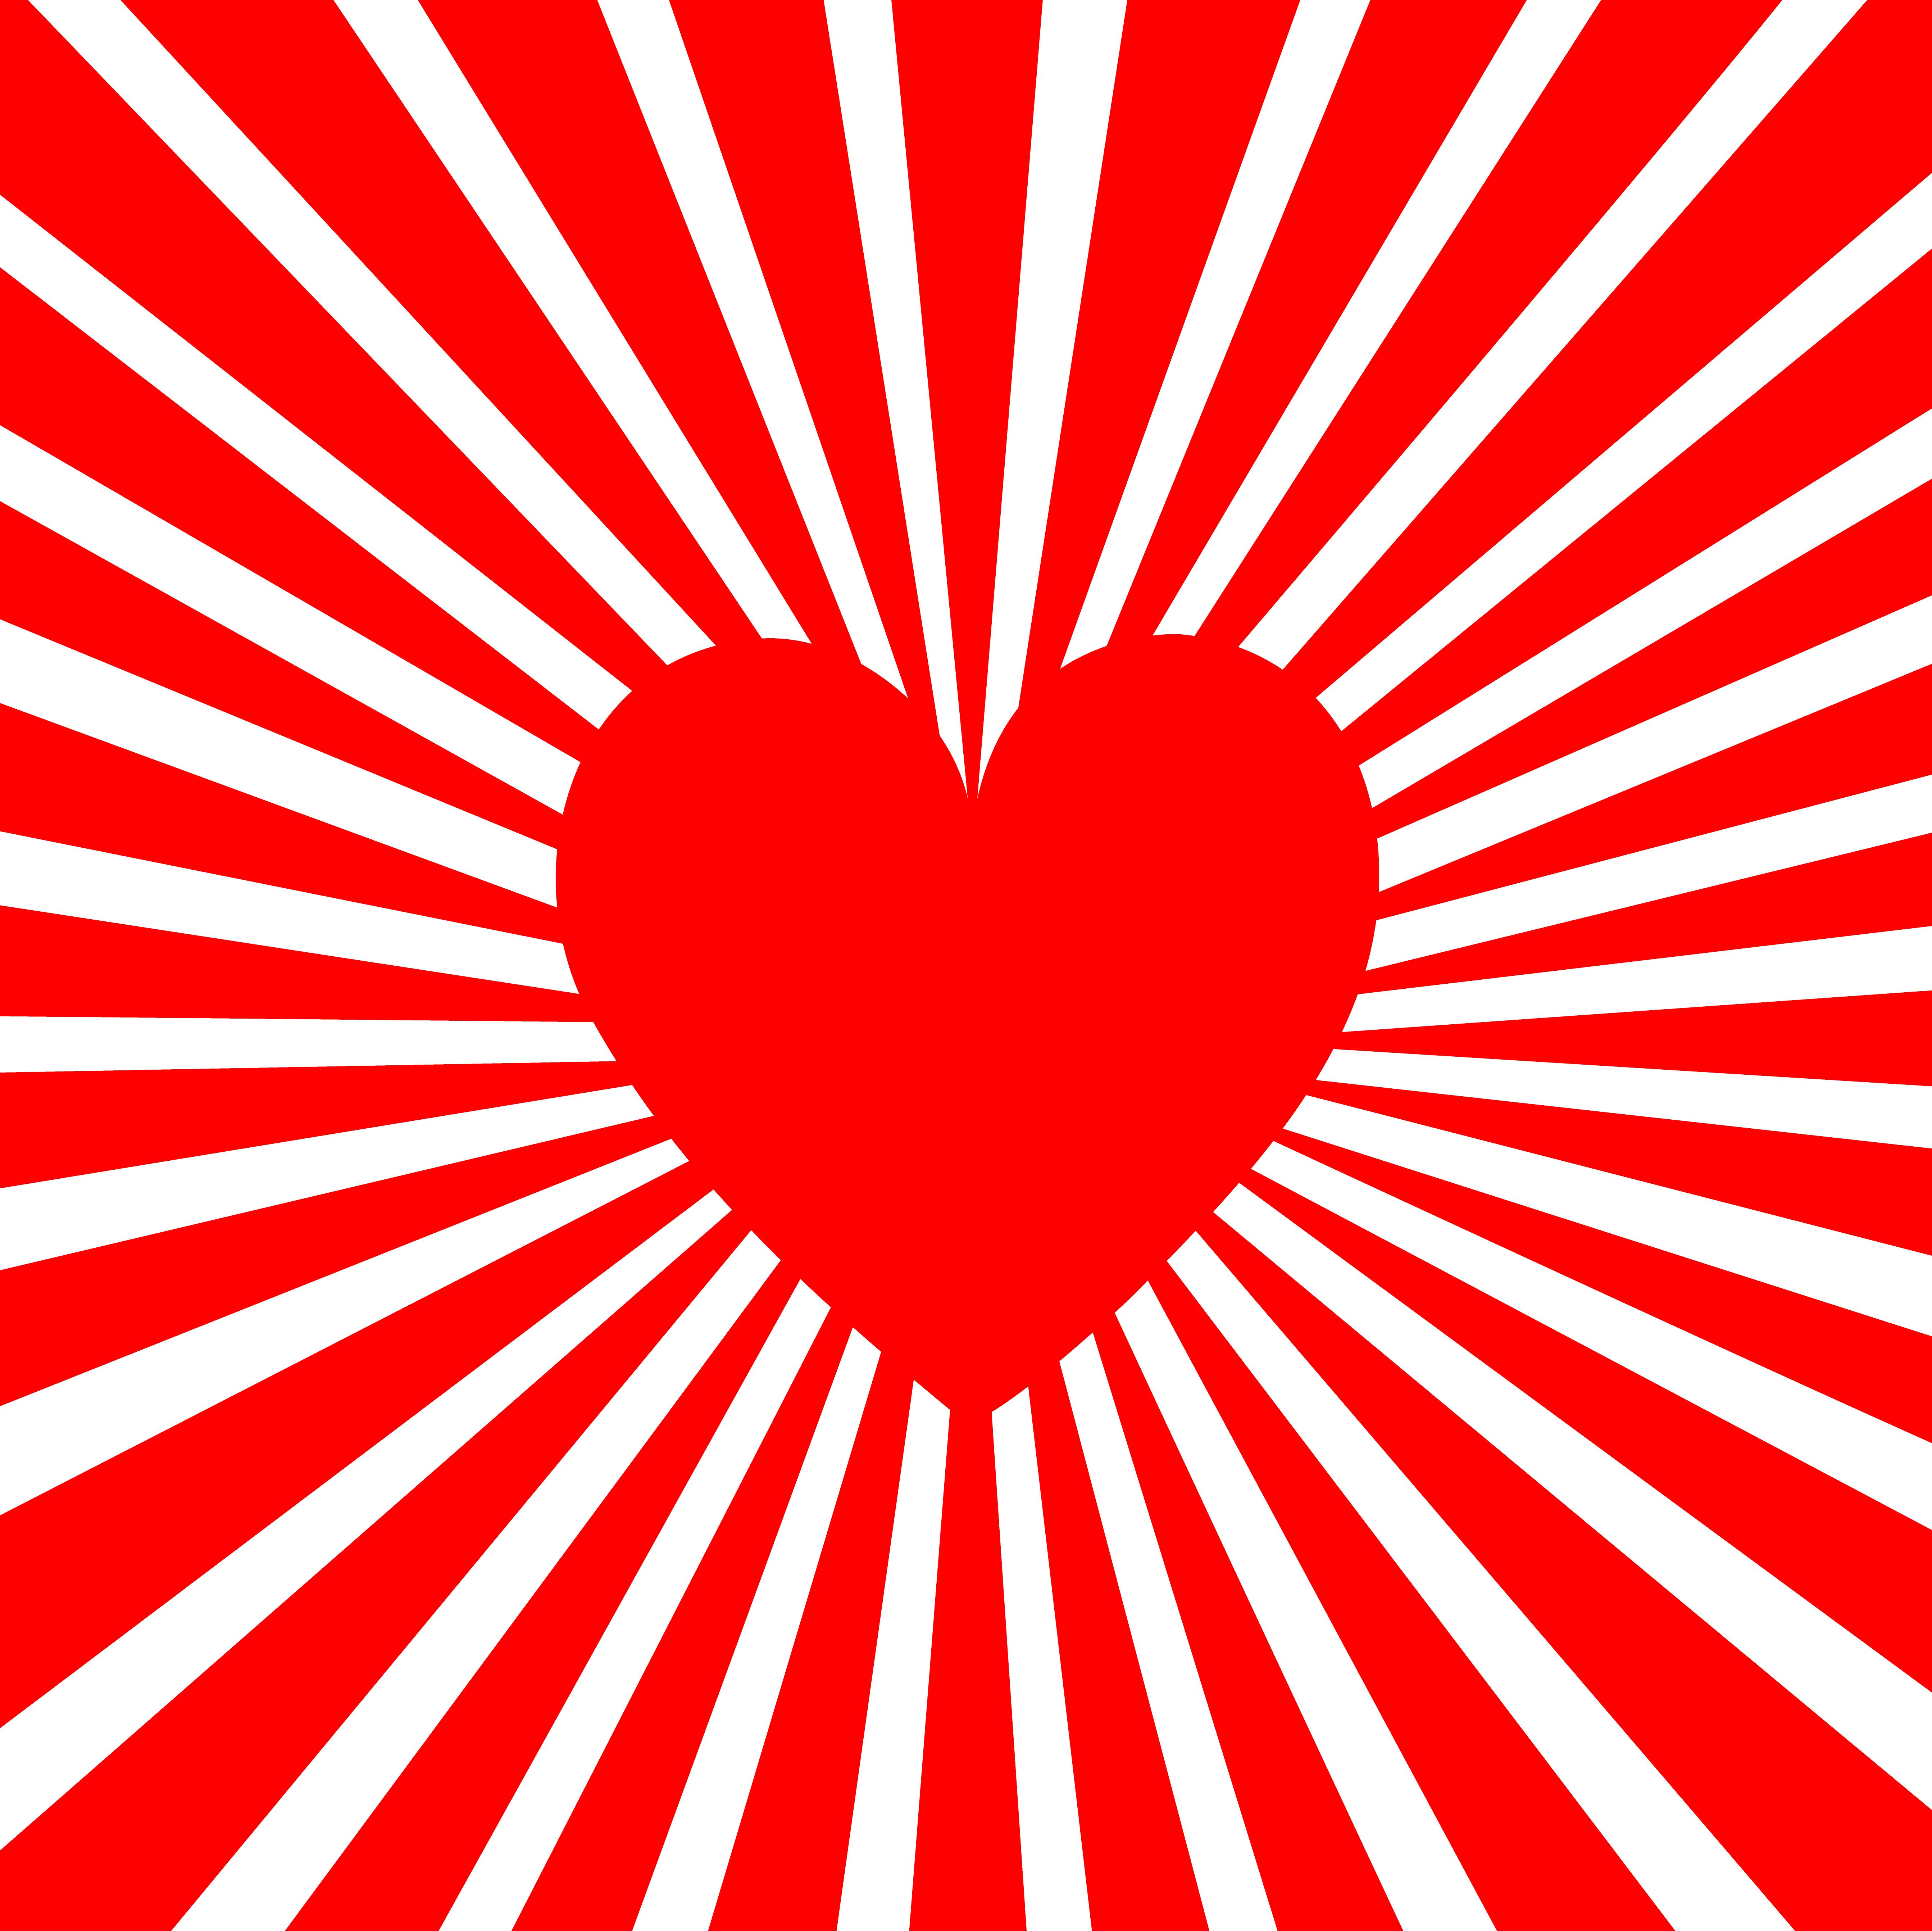 Red heart with free. Burst clipart line